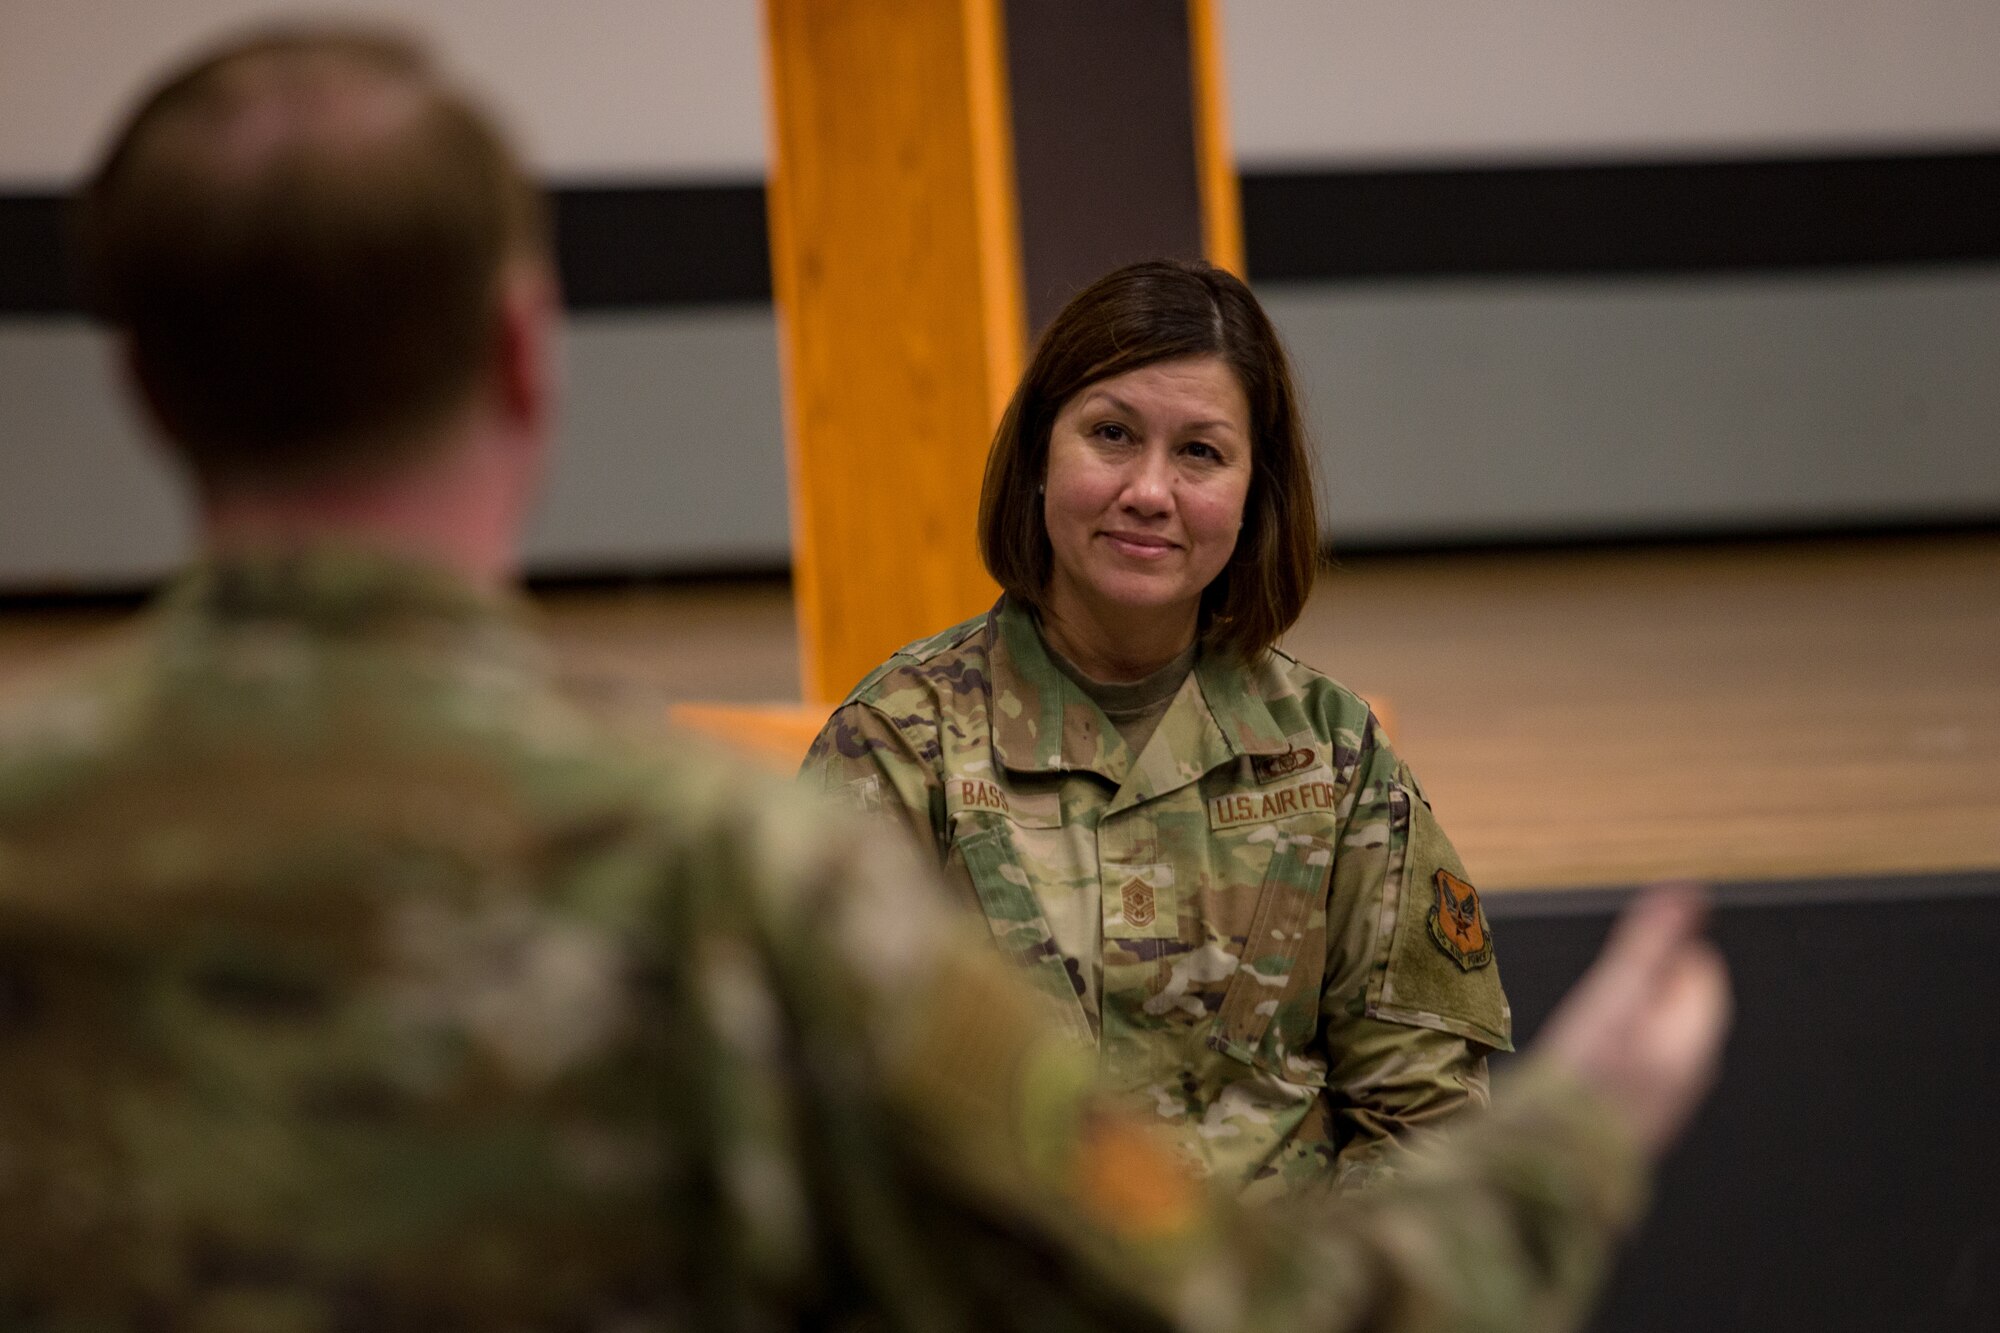 Chief Master Sgt. of the Air Force JoAnne S. Bass listens to an Airman during a Q&A forum at Edwards Air Force Base, California, June 28. (Air Force photo by Maygan Straight)